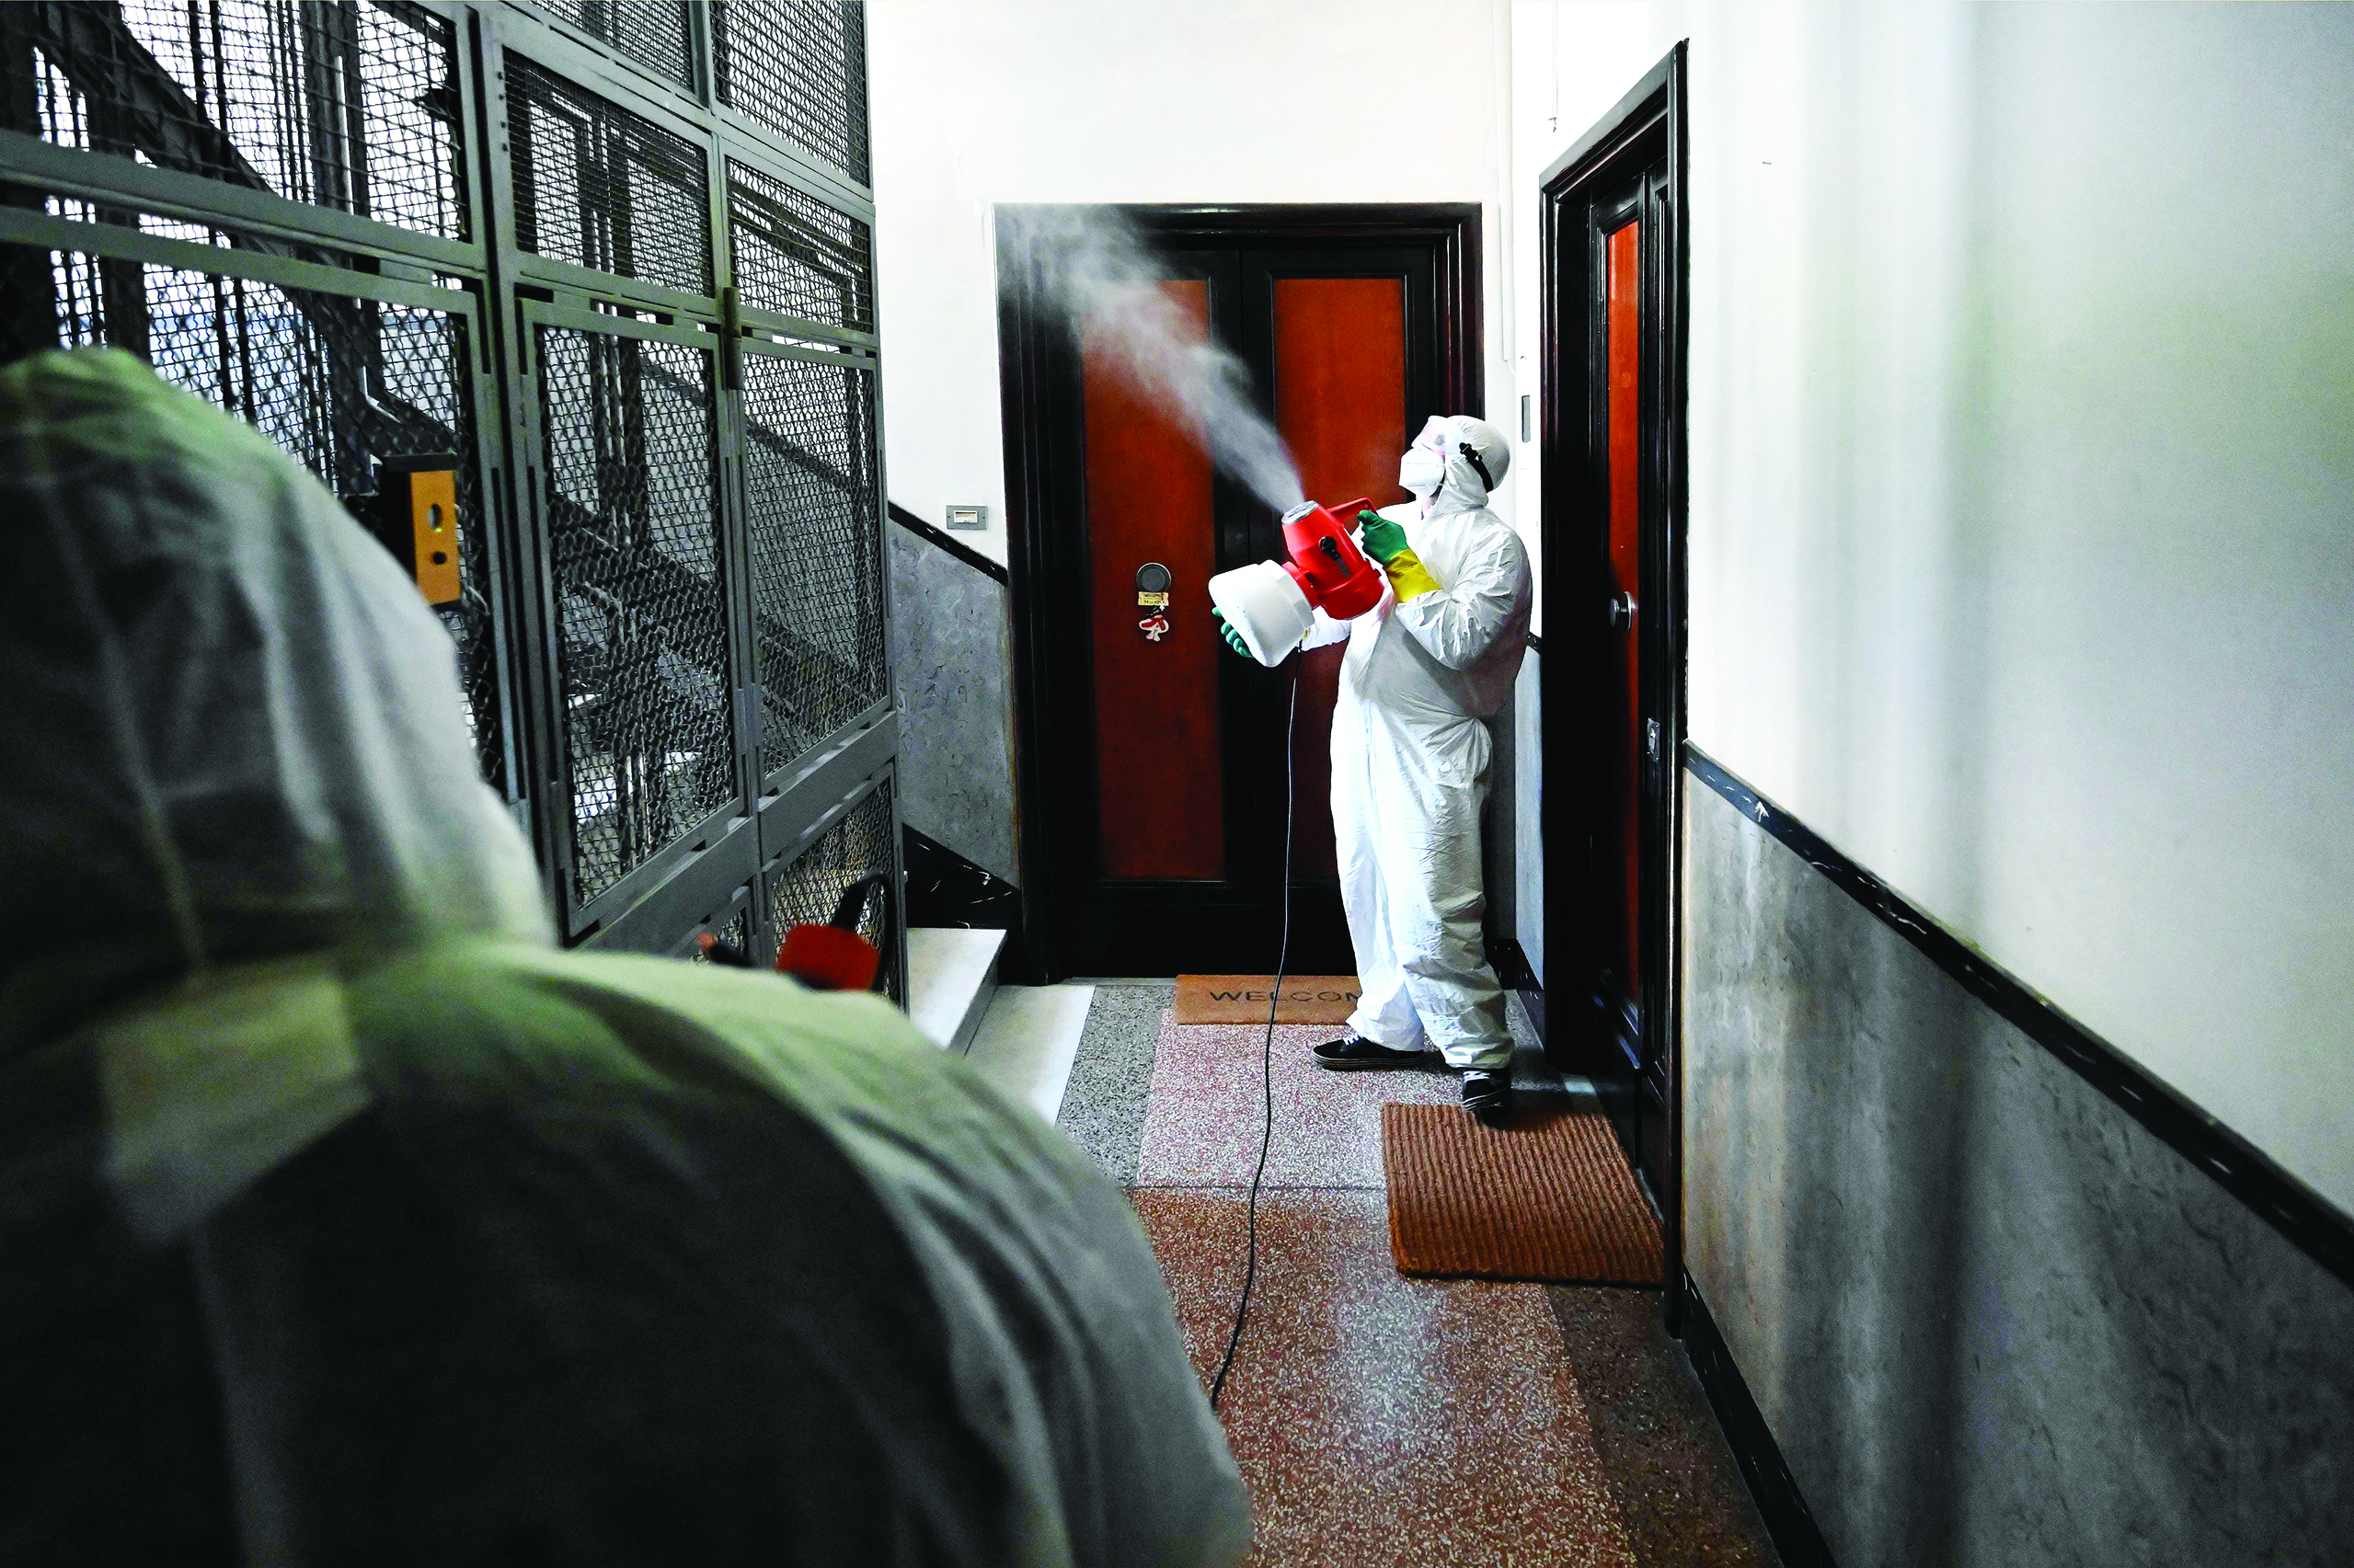 TOPSHOT - Employees of a private company spray disinfectant in a building on March 31, 2020 in Rome, during the country's lockdown aimed at stopping the spread of the COVID-19 (new coronavirus) pandemic. (Photo by Alberto PIZZOLI / AFP)